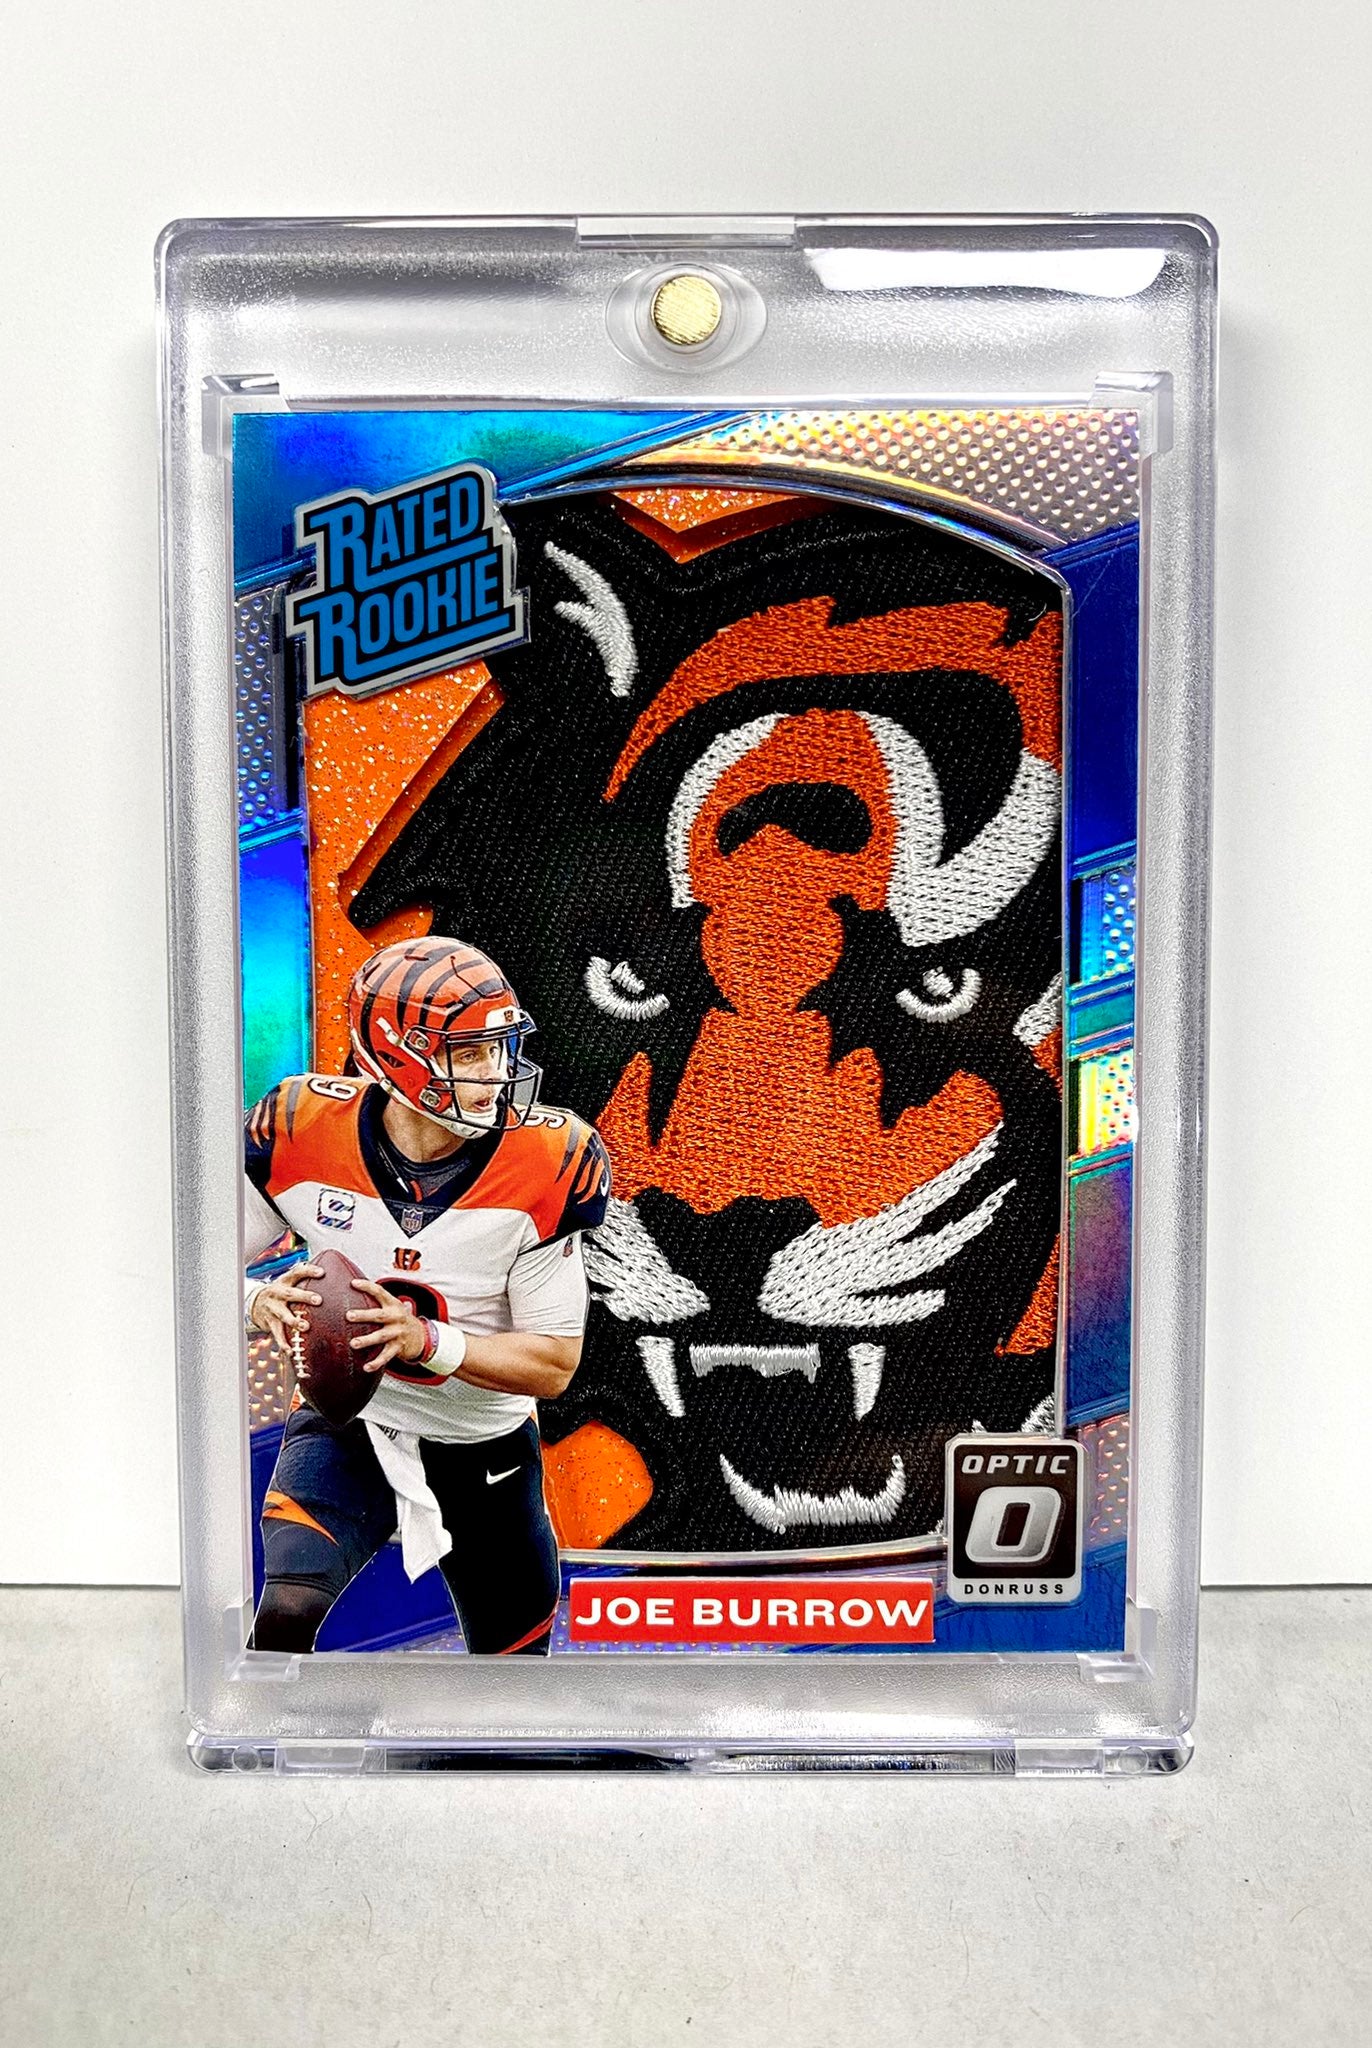 Joe Burrow Bengals Team Patch Rated Rookie 1/1